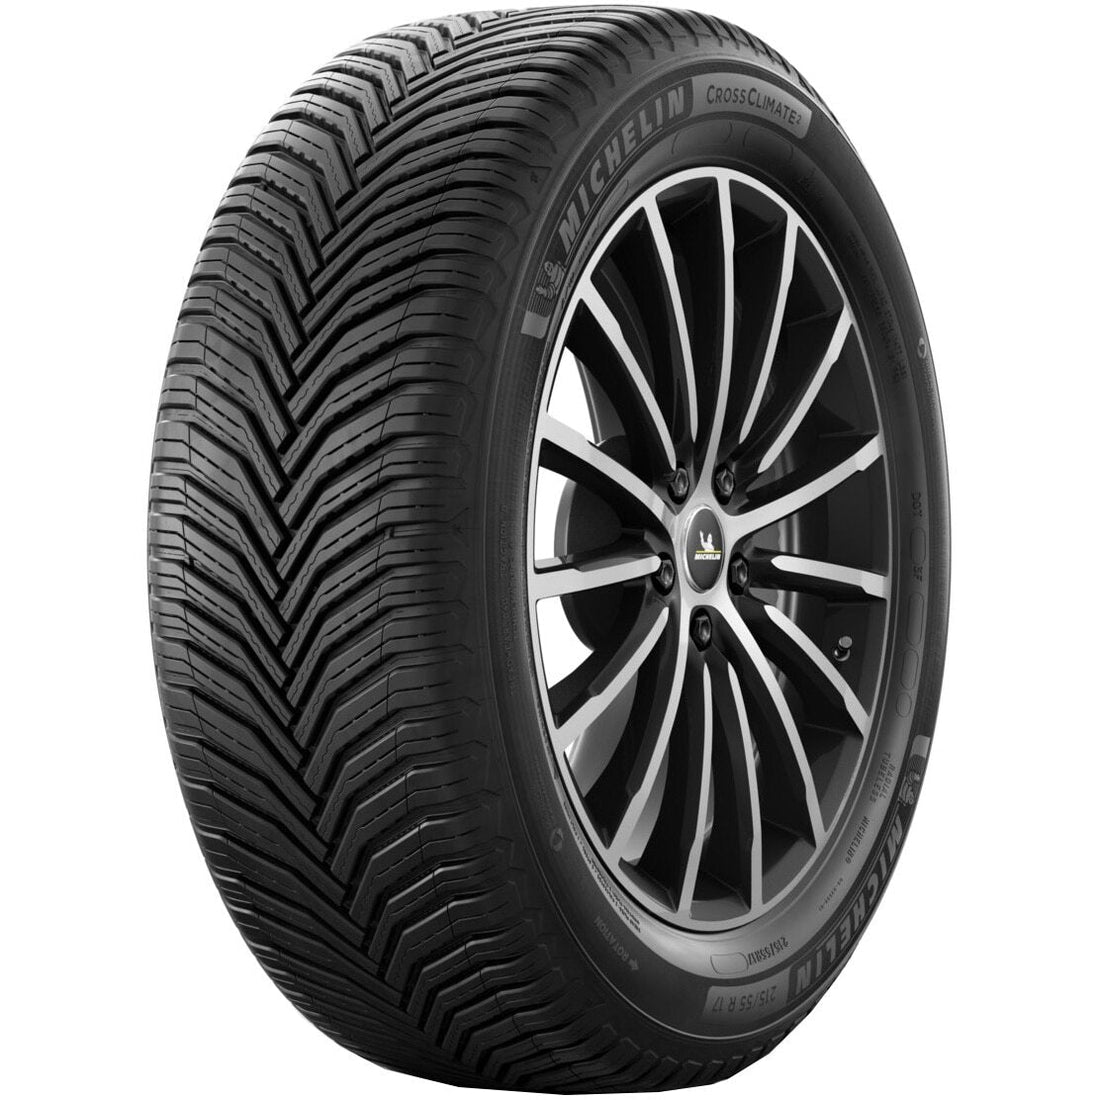 Anvelope All-season Michelin Crossclimate suv 2 225/65R17 106V XL Anvelux